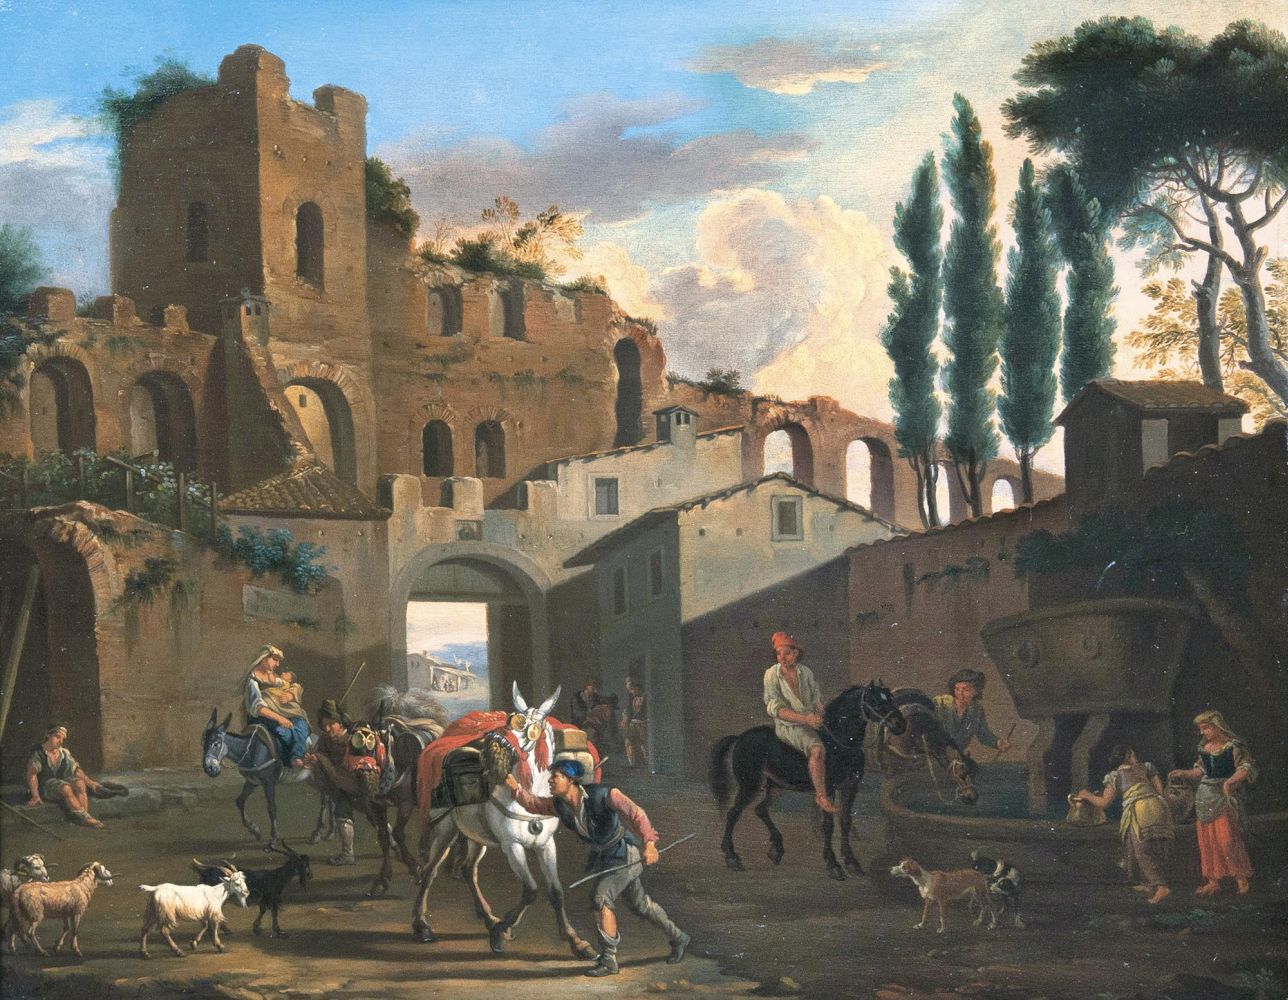 Ruins with Riders and Pack animals